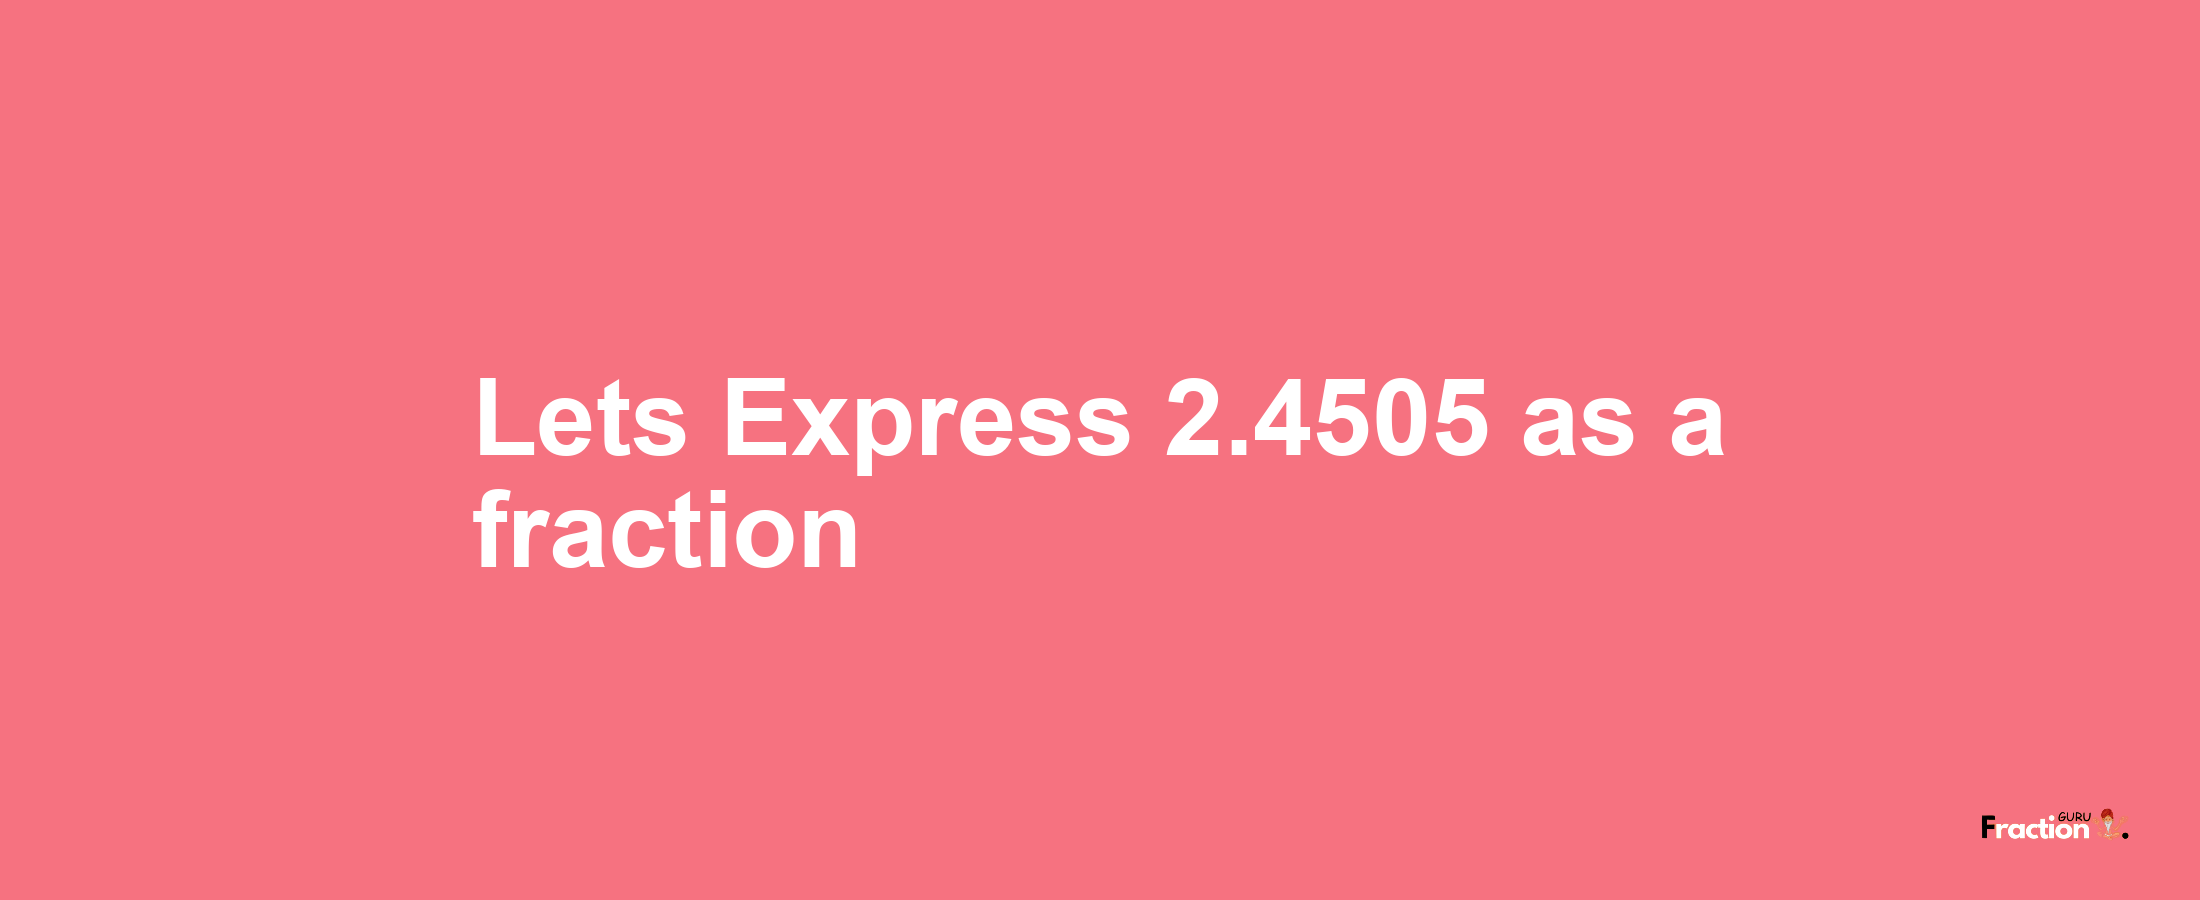 Lets Express 2.4505 as afraction